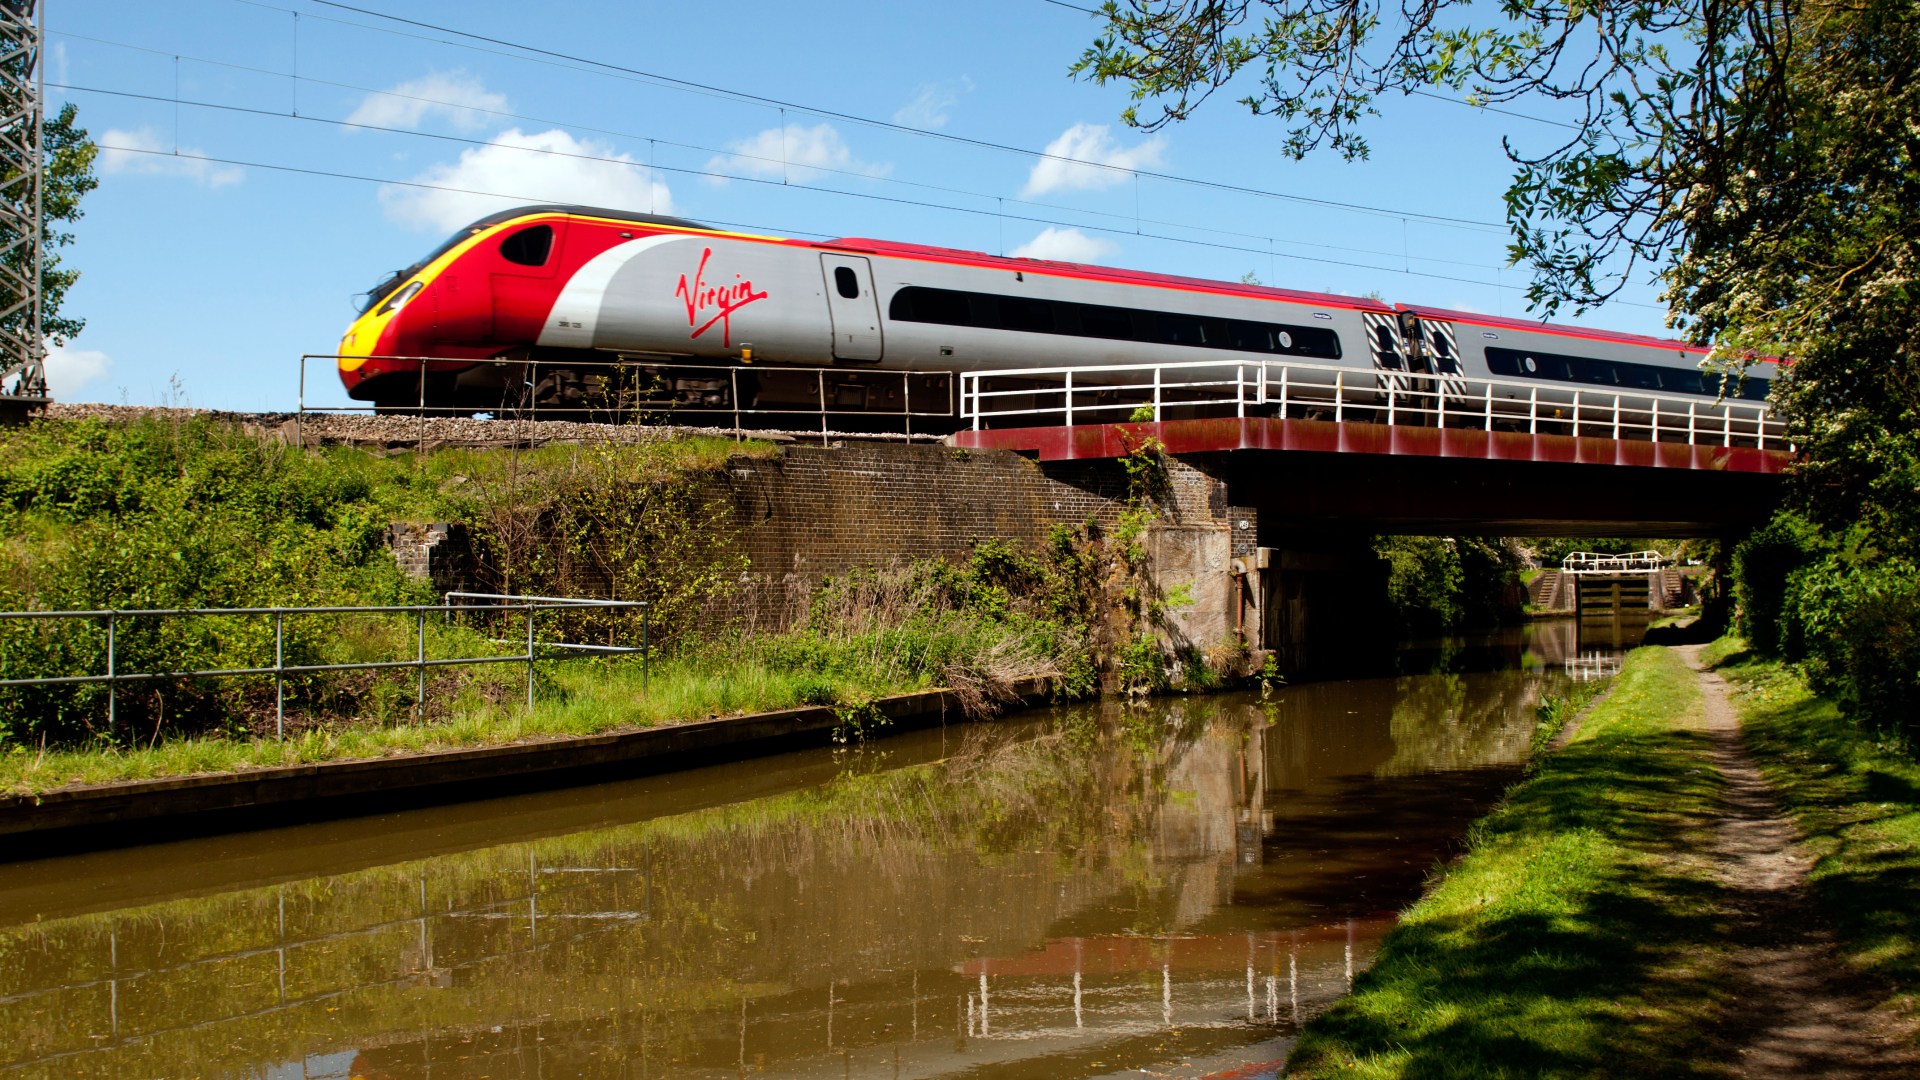 Virgin set to disrupt European travel market with relaunch of UK trains – move over Eurostar!